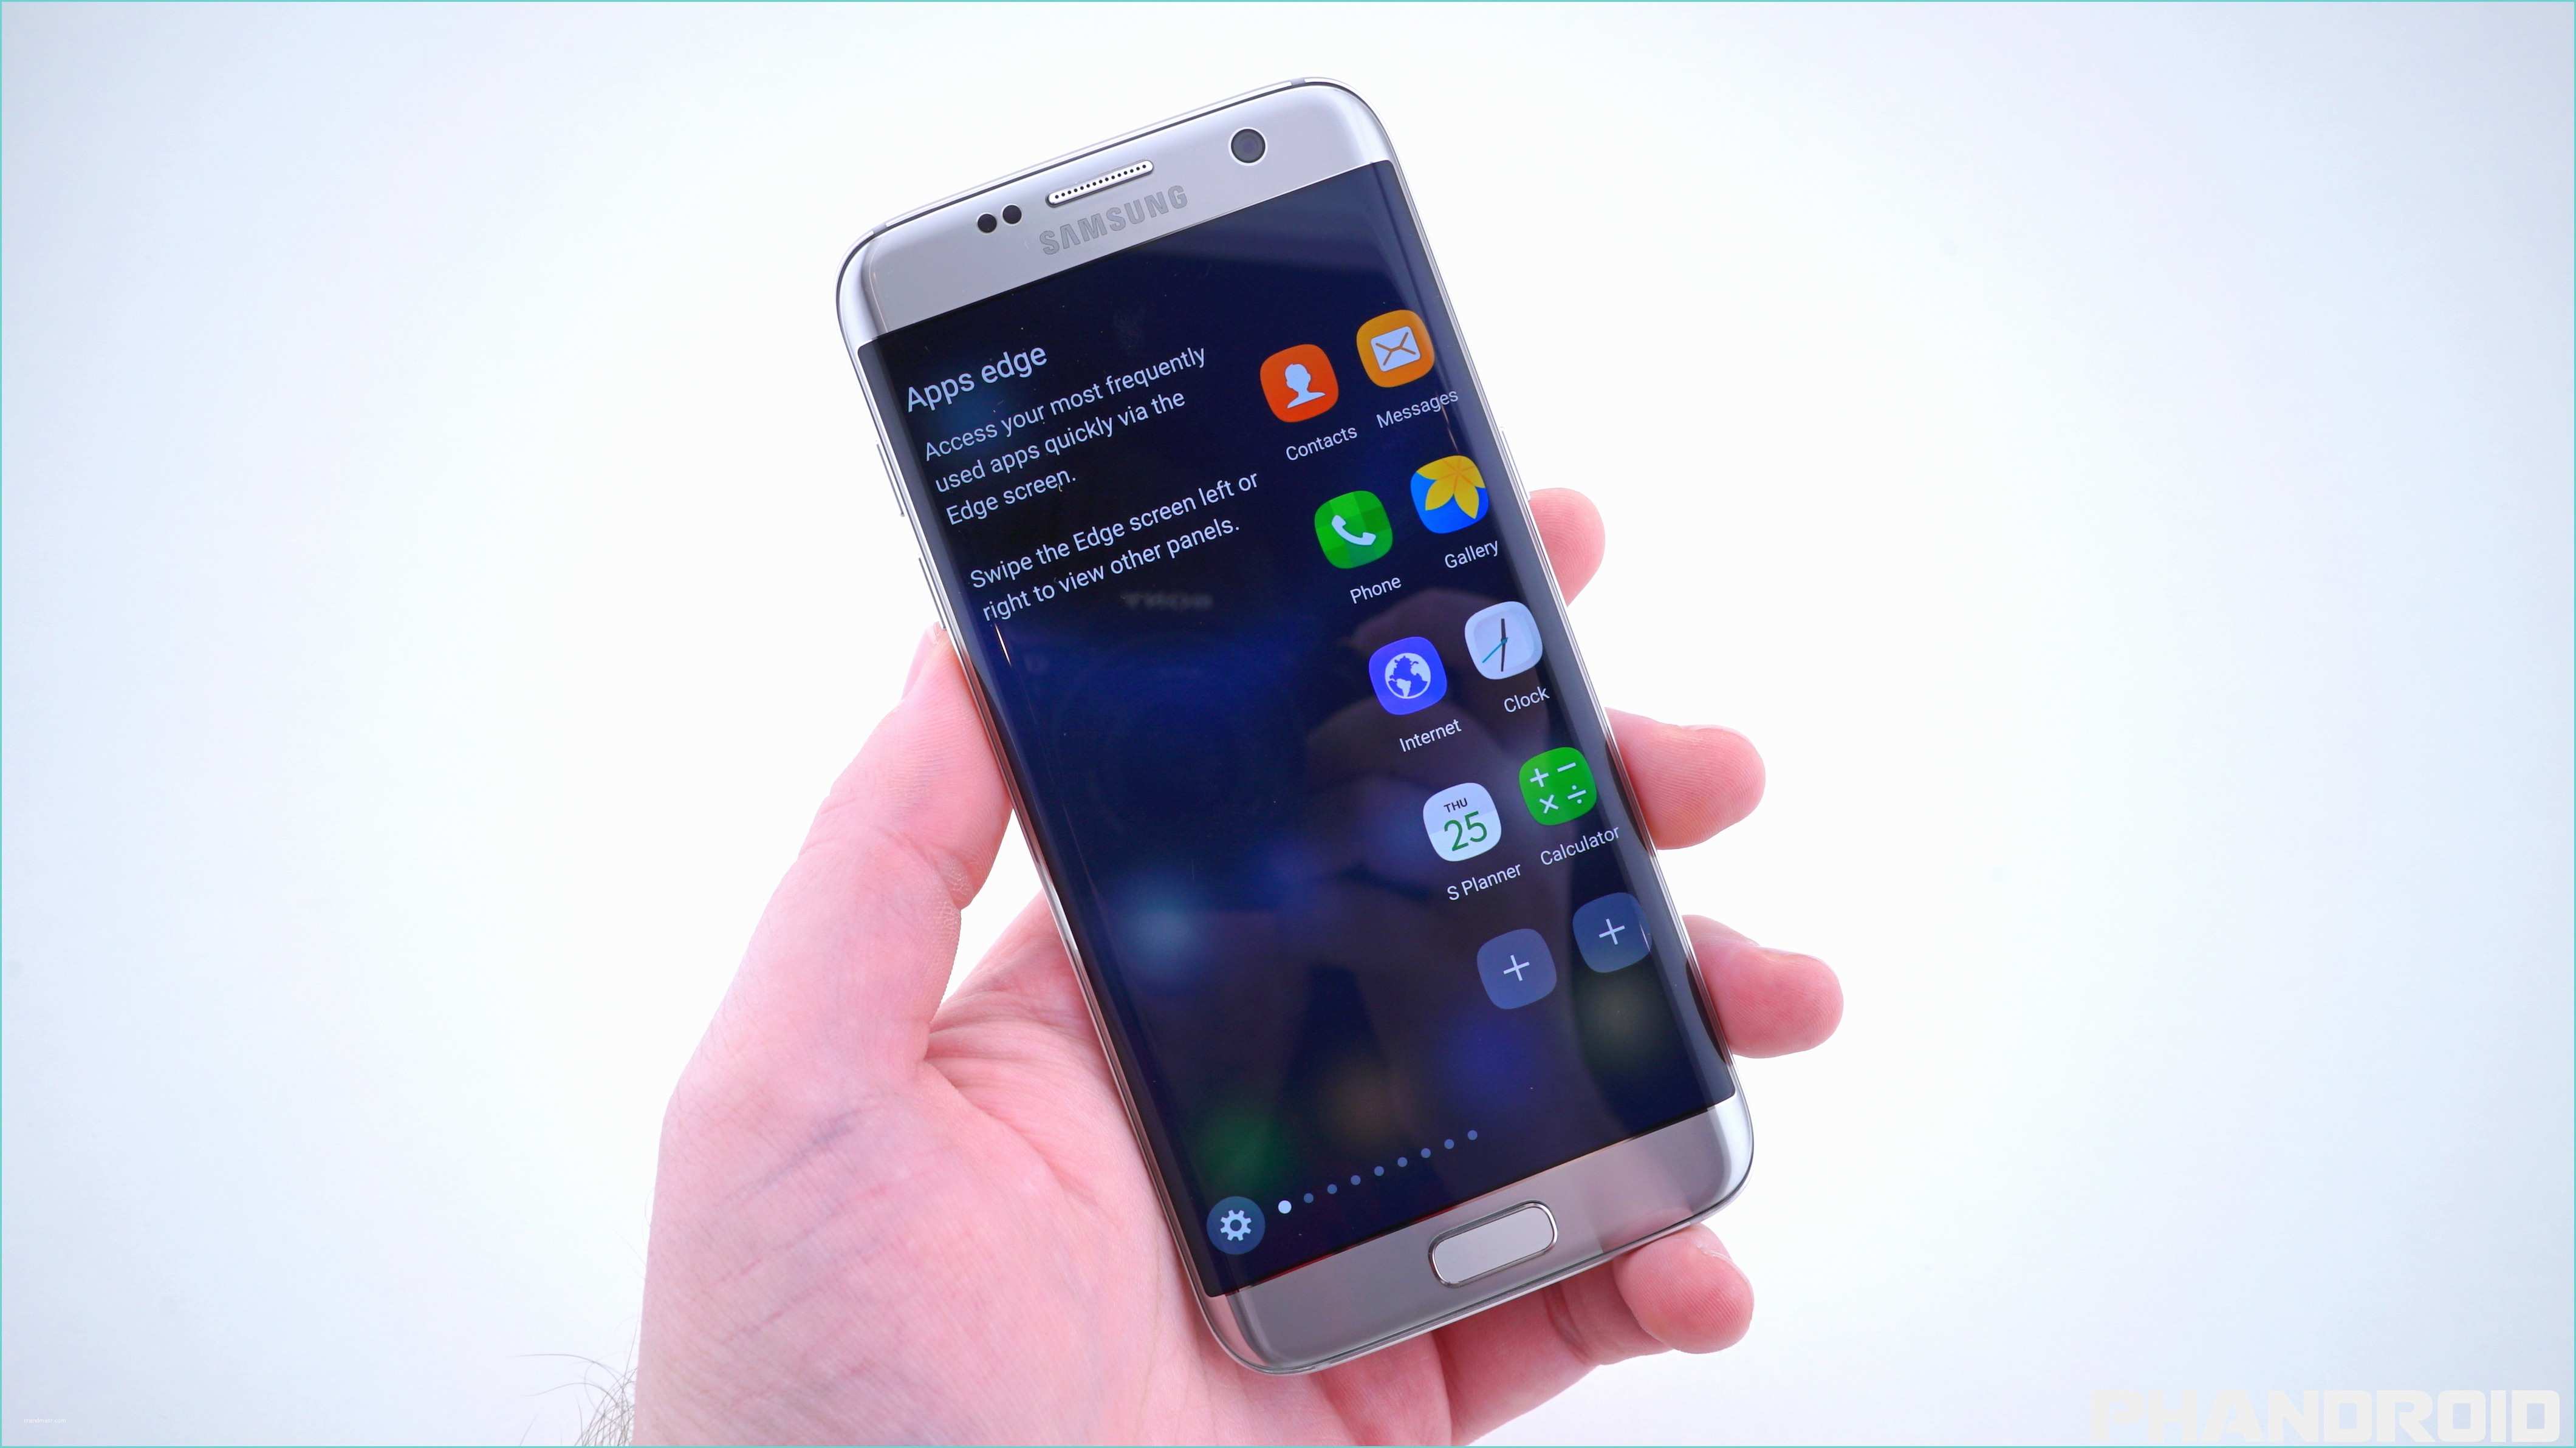 Mediaworld Samsung S7 Edge 8 Best Samsung Galaxy S7 and Galaxy S7 Edge Features